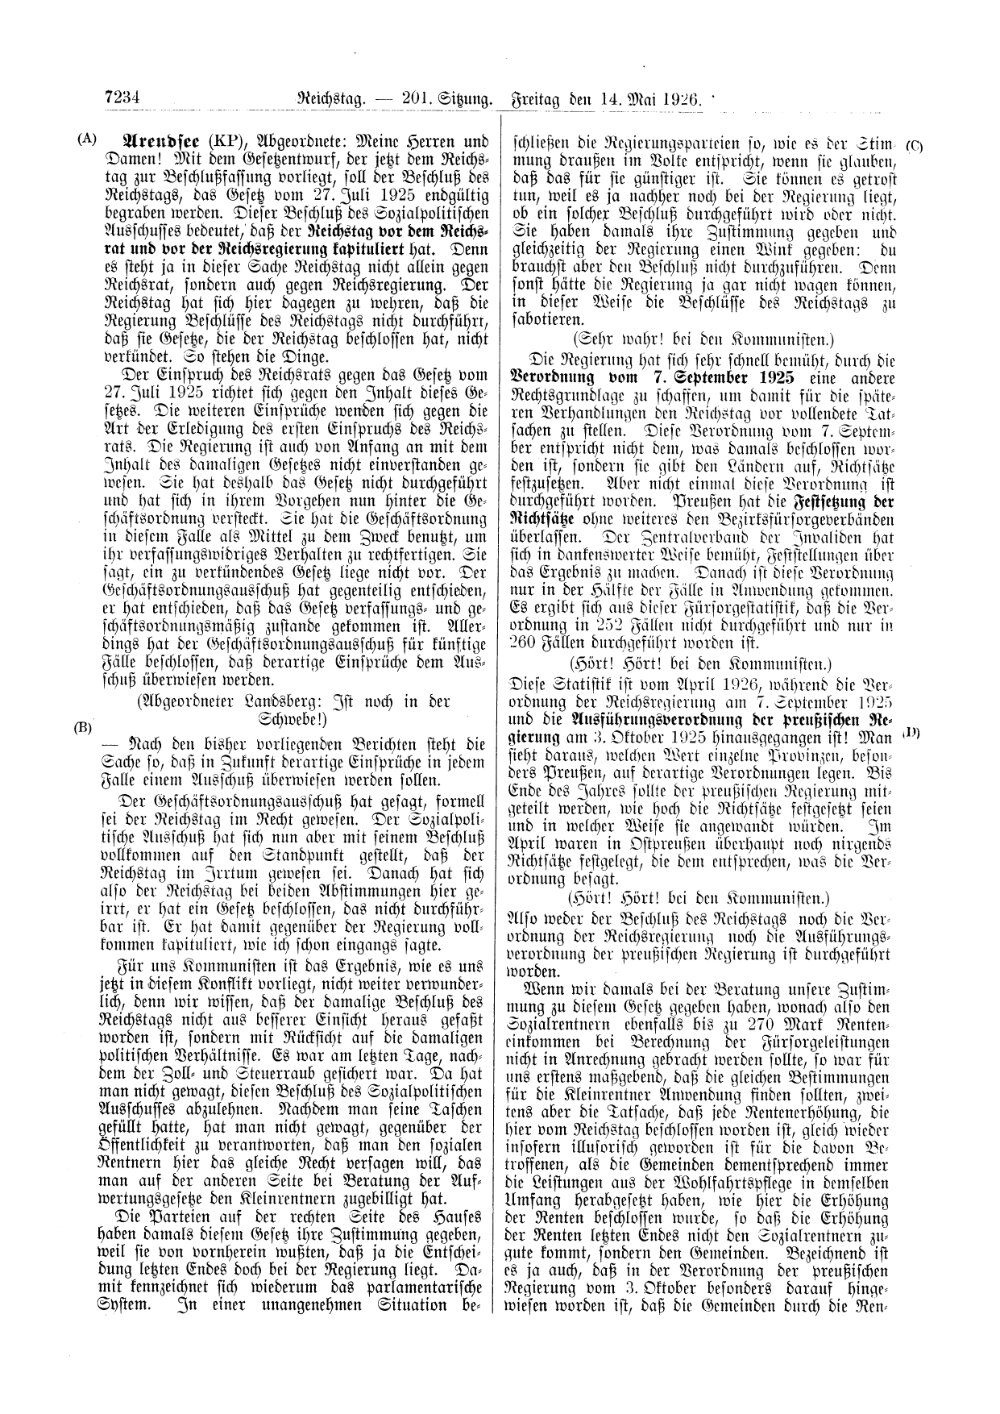 Scan of page 7234